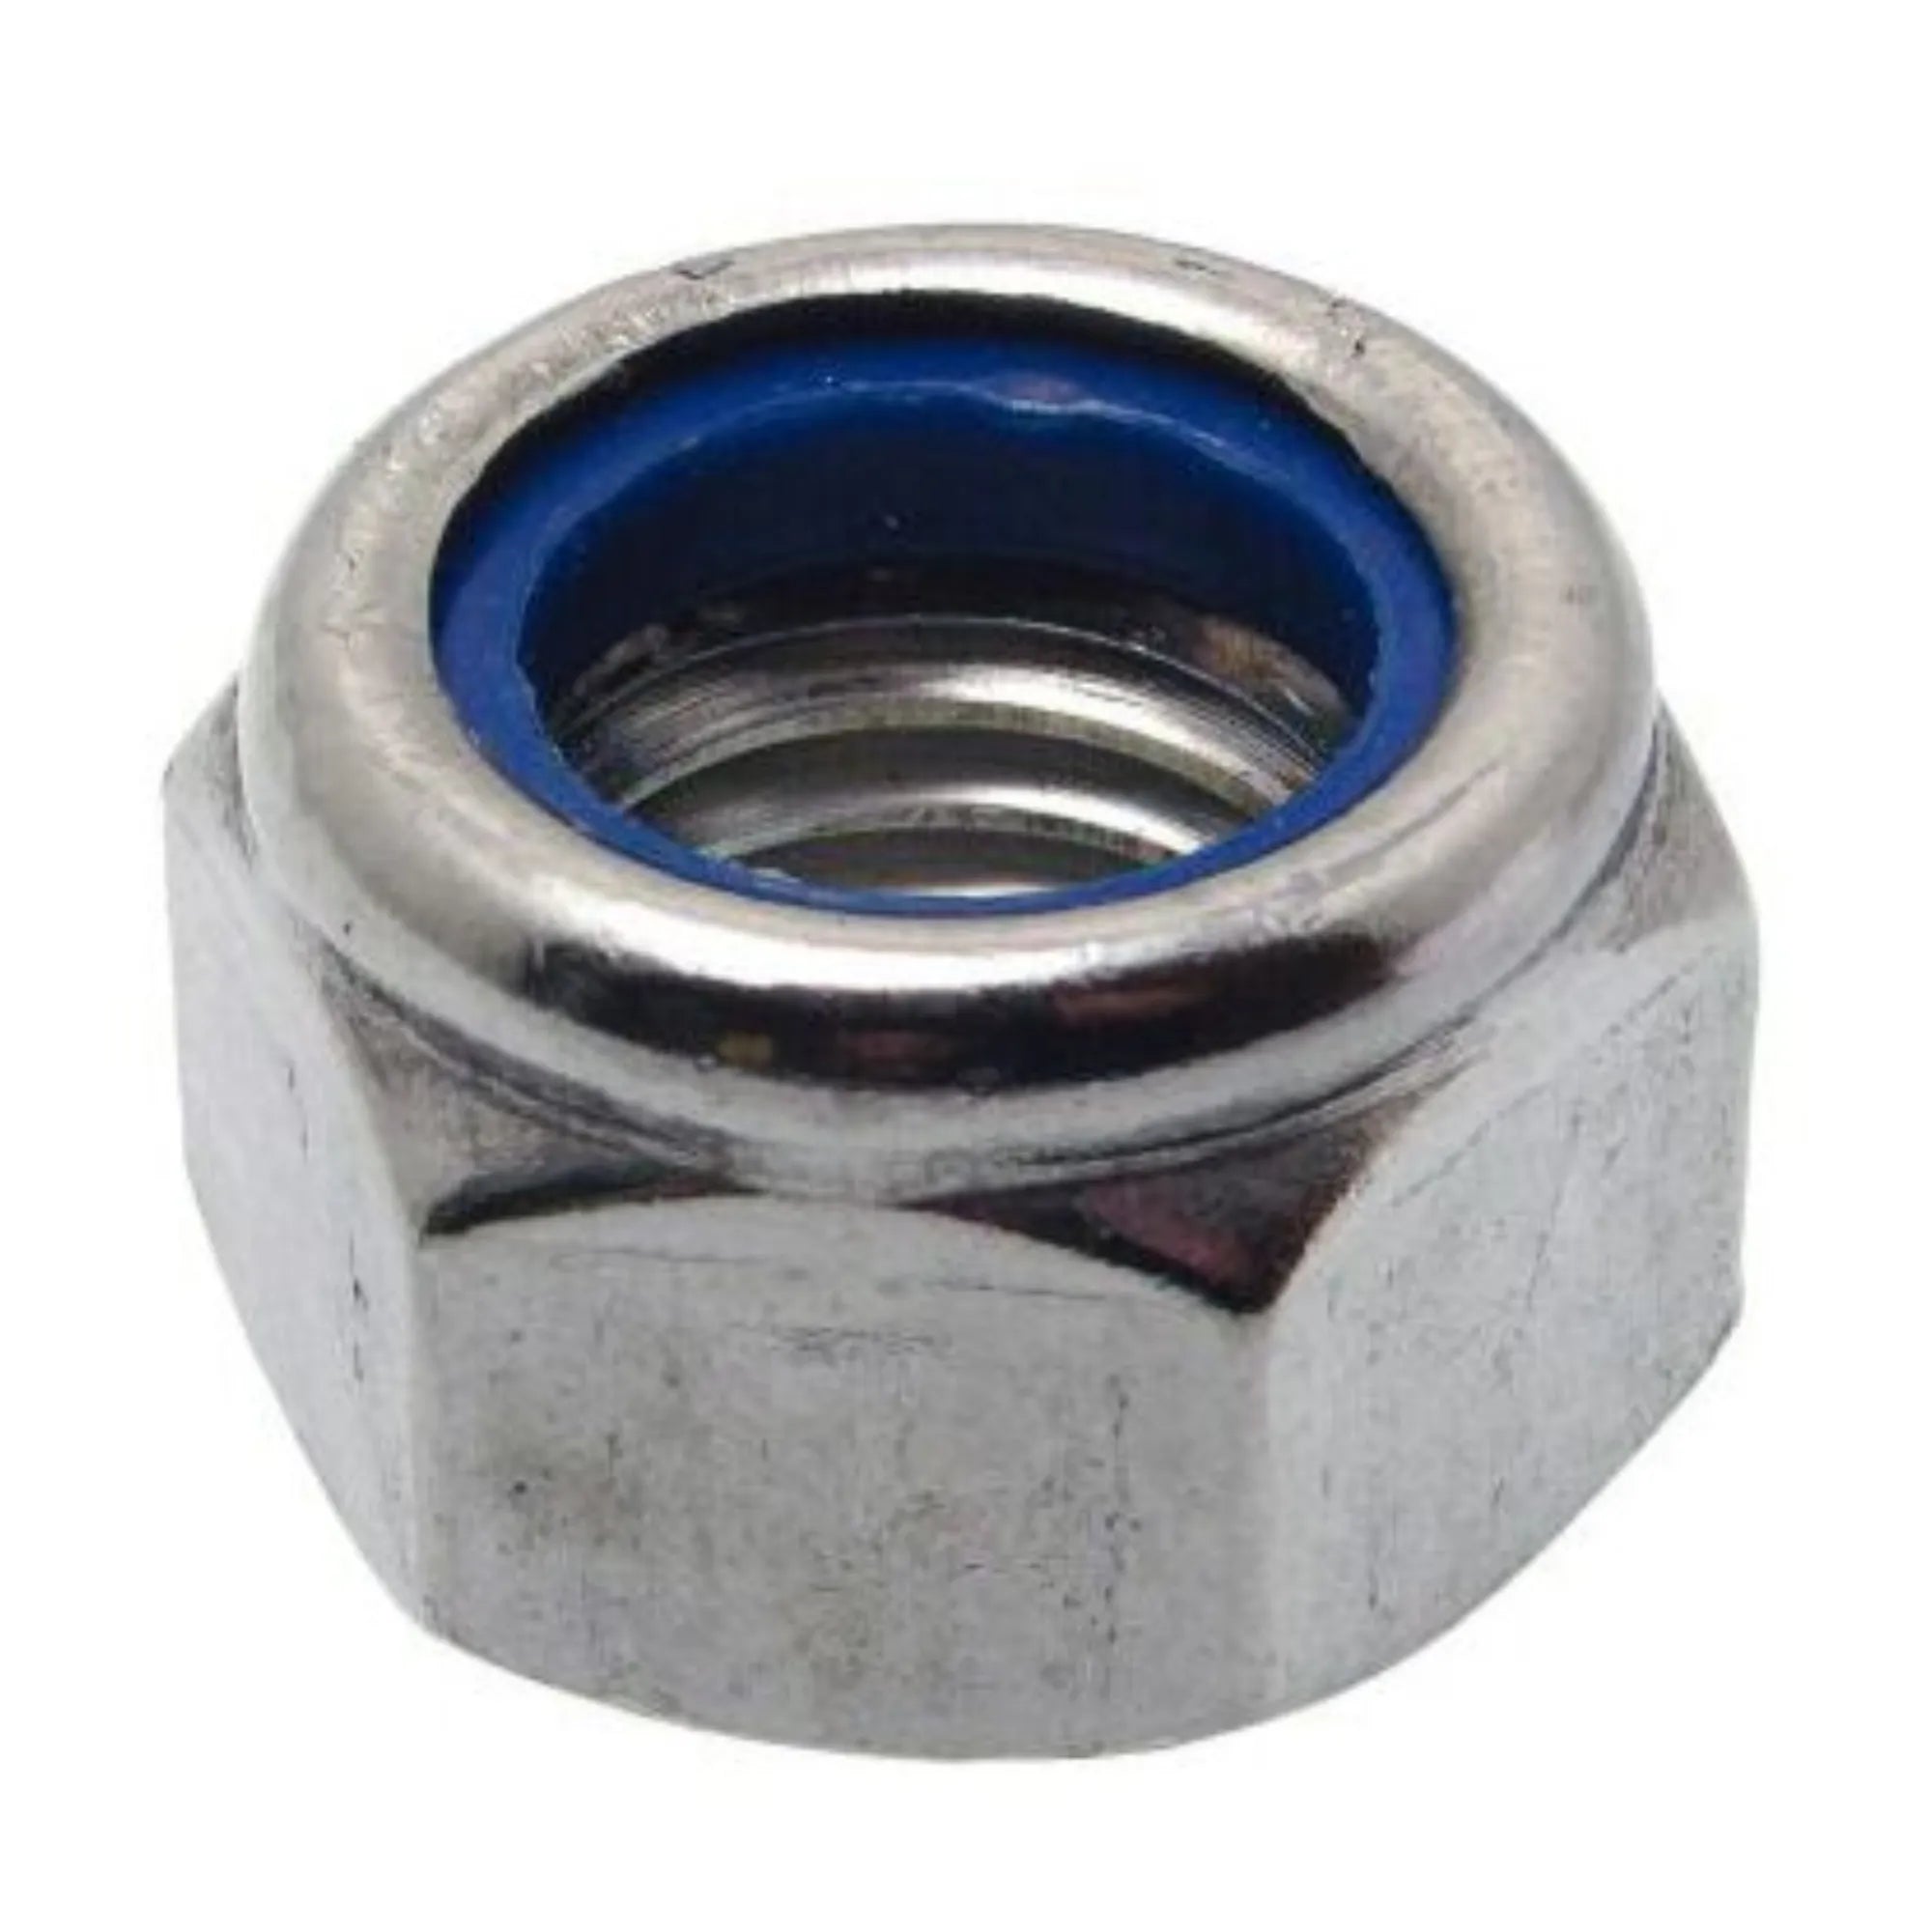 A4 S/S Nyloc Lock Nuts